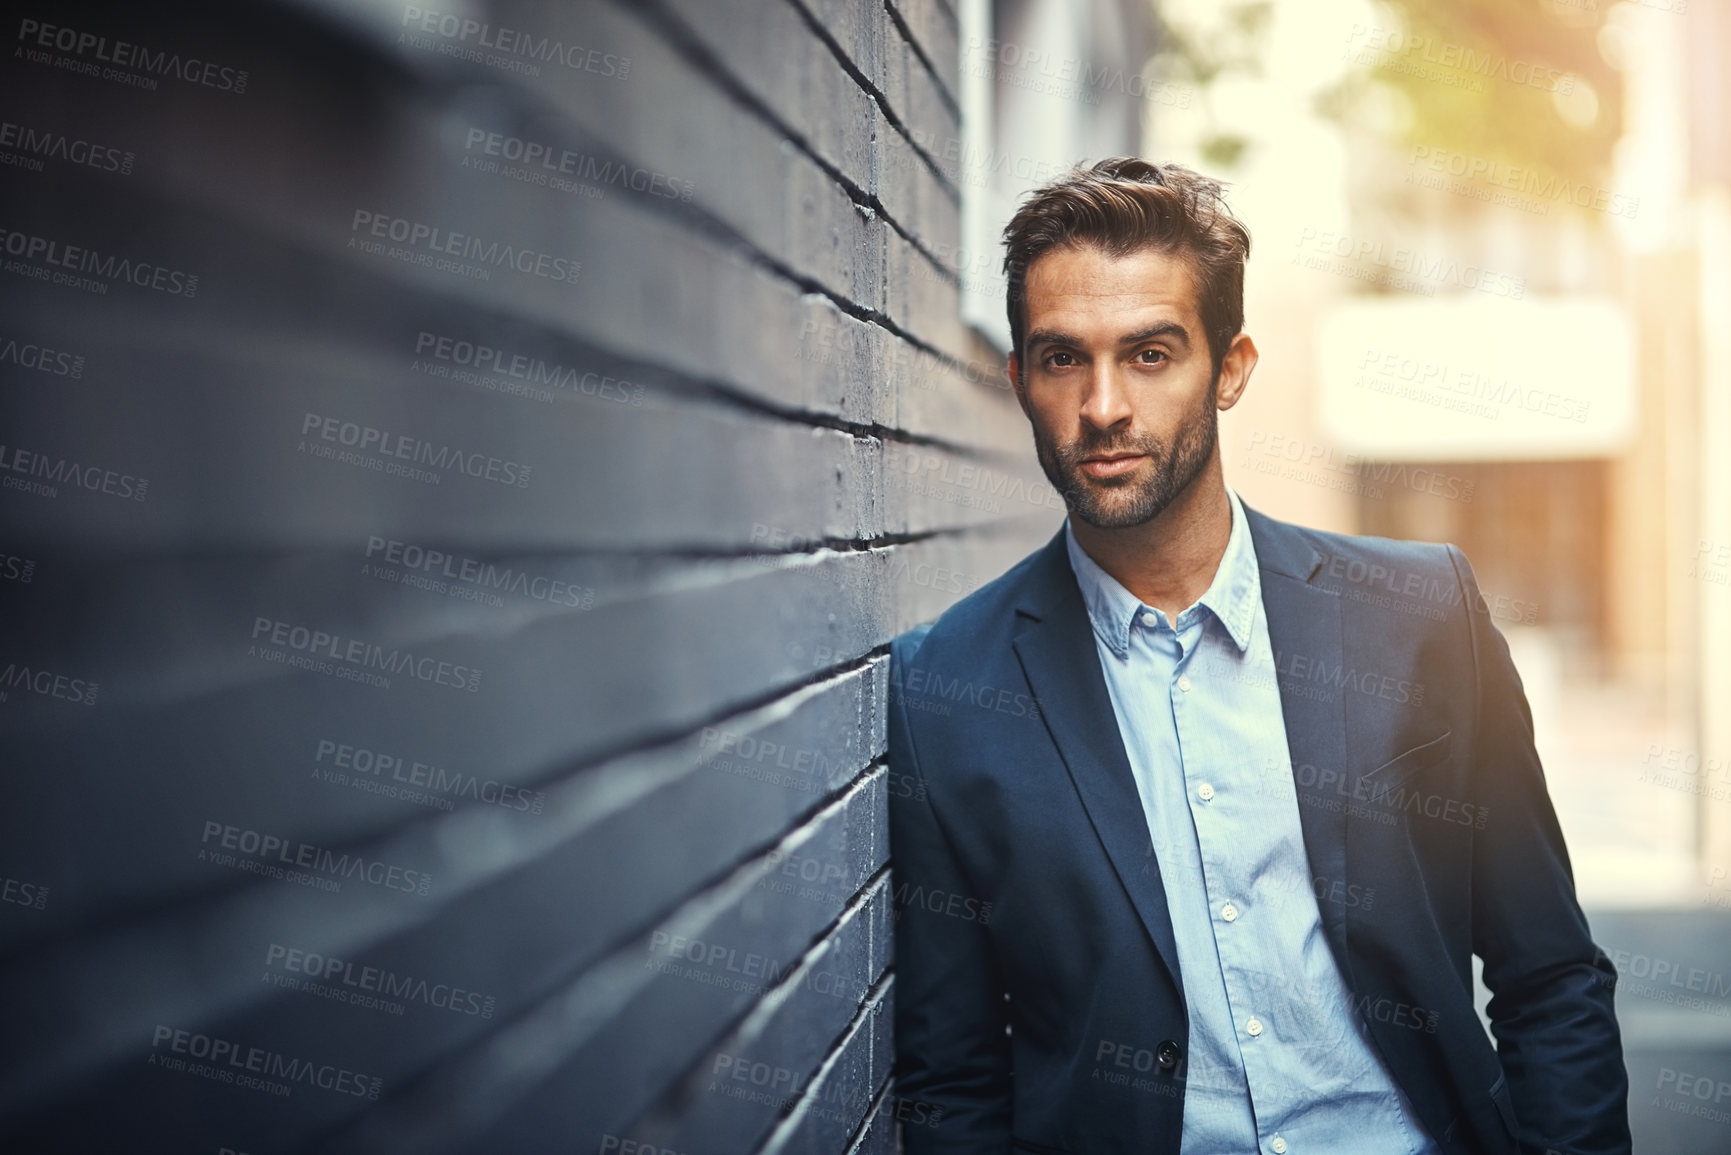 Buy stock photo Serious, businessman and portrait in city by wall for corporate fashion, trendy and stylish suit. Male entrepreneur, professional and confident in street for travel to work or company and outdoors.